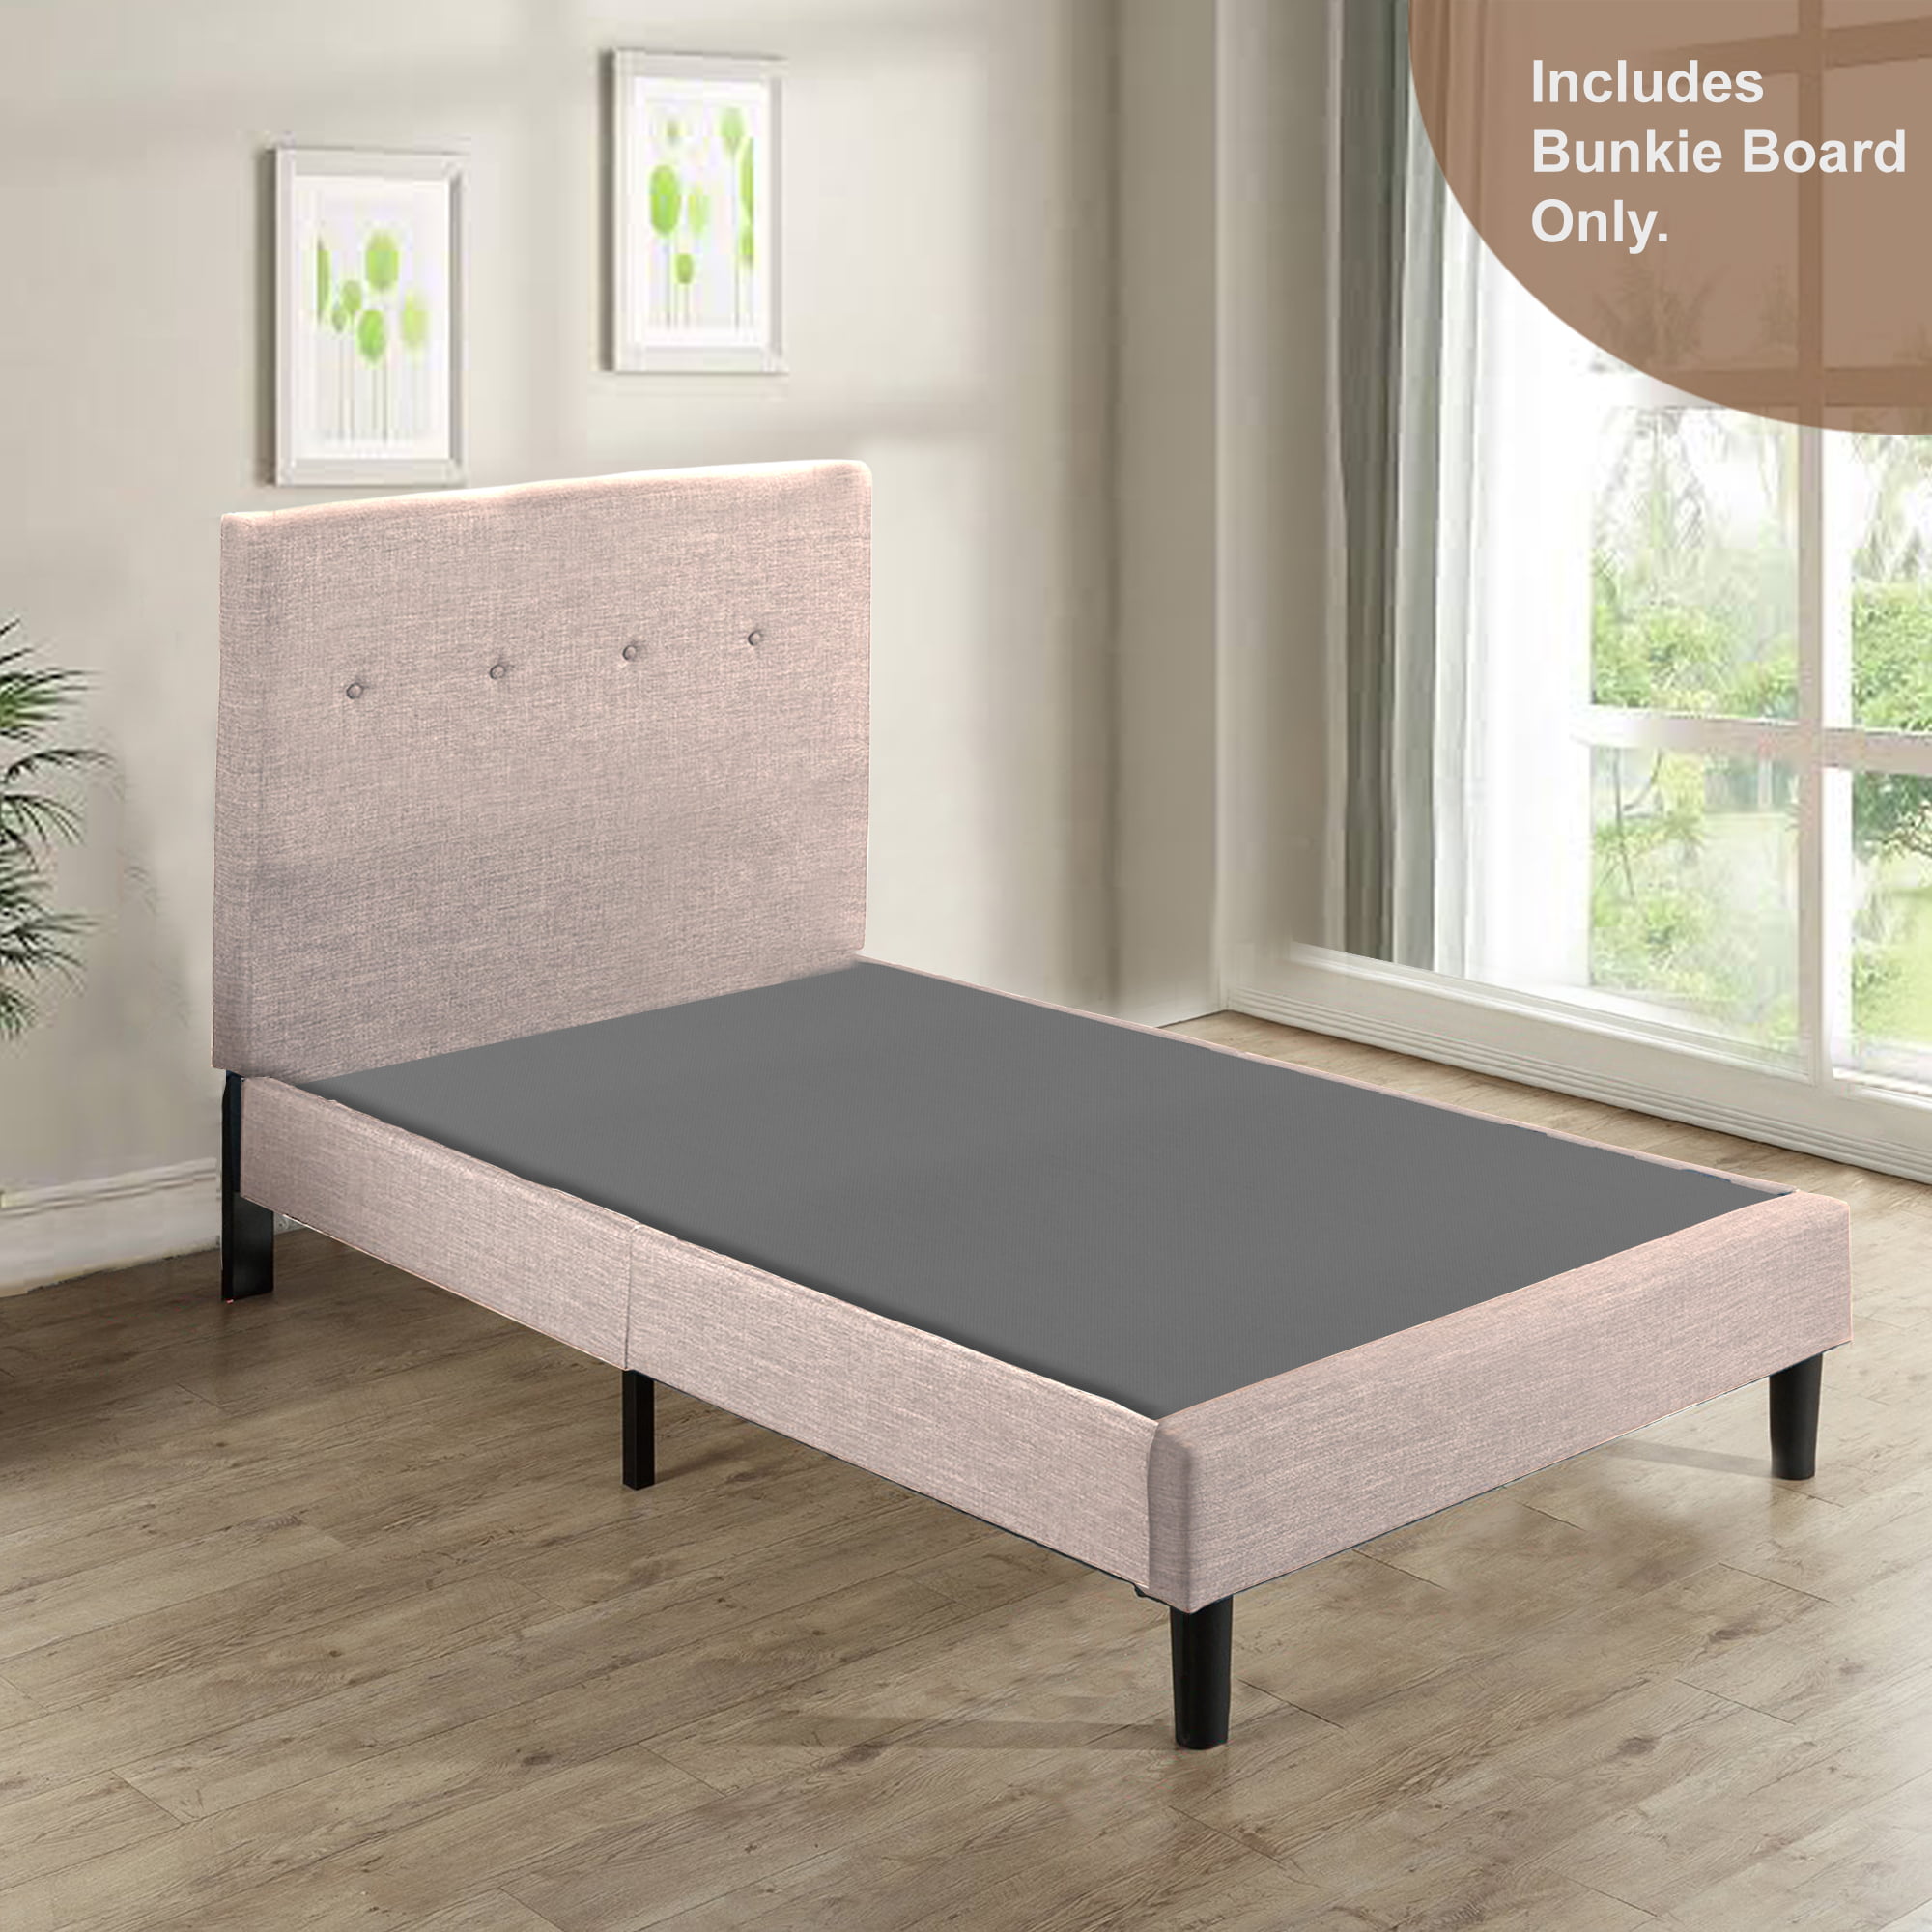 Continental Sleep, 1.5-Inch Fully Assembled Bunkie Board ...